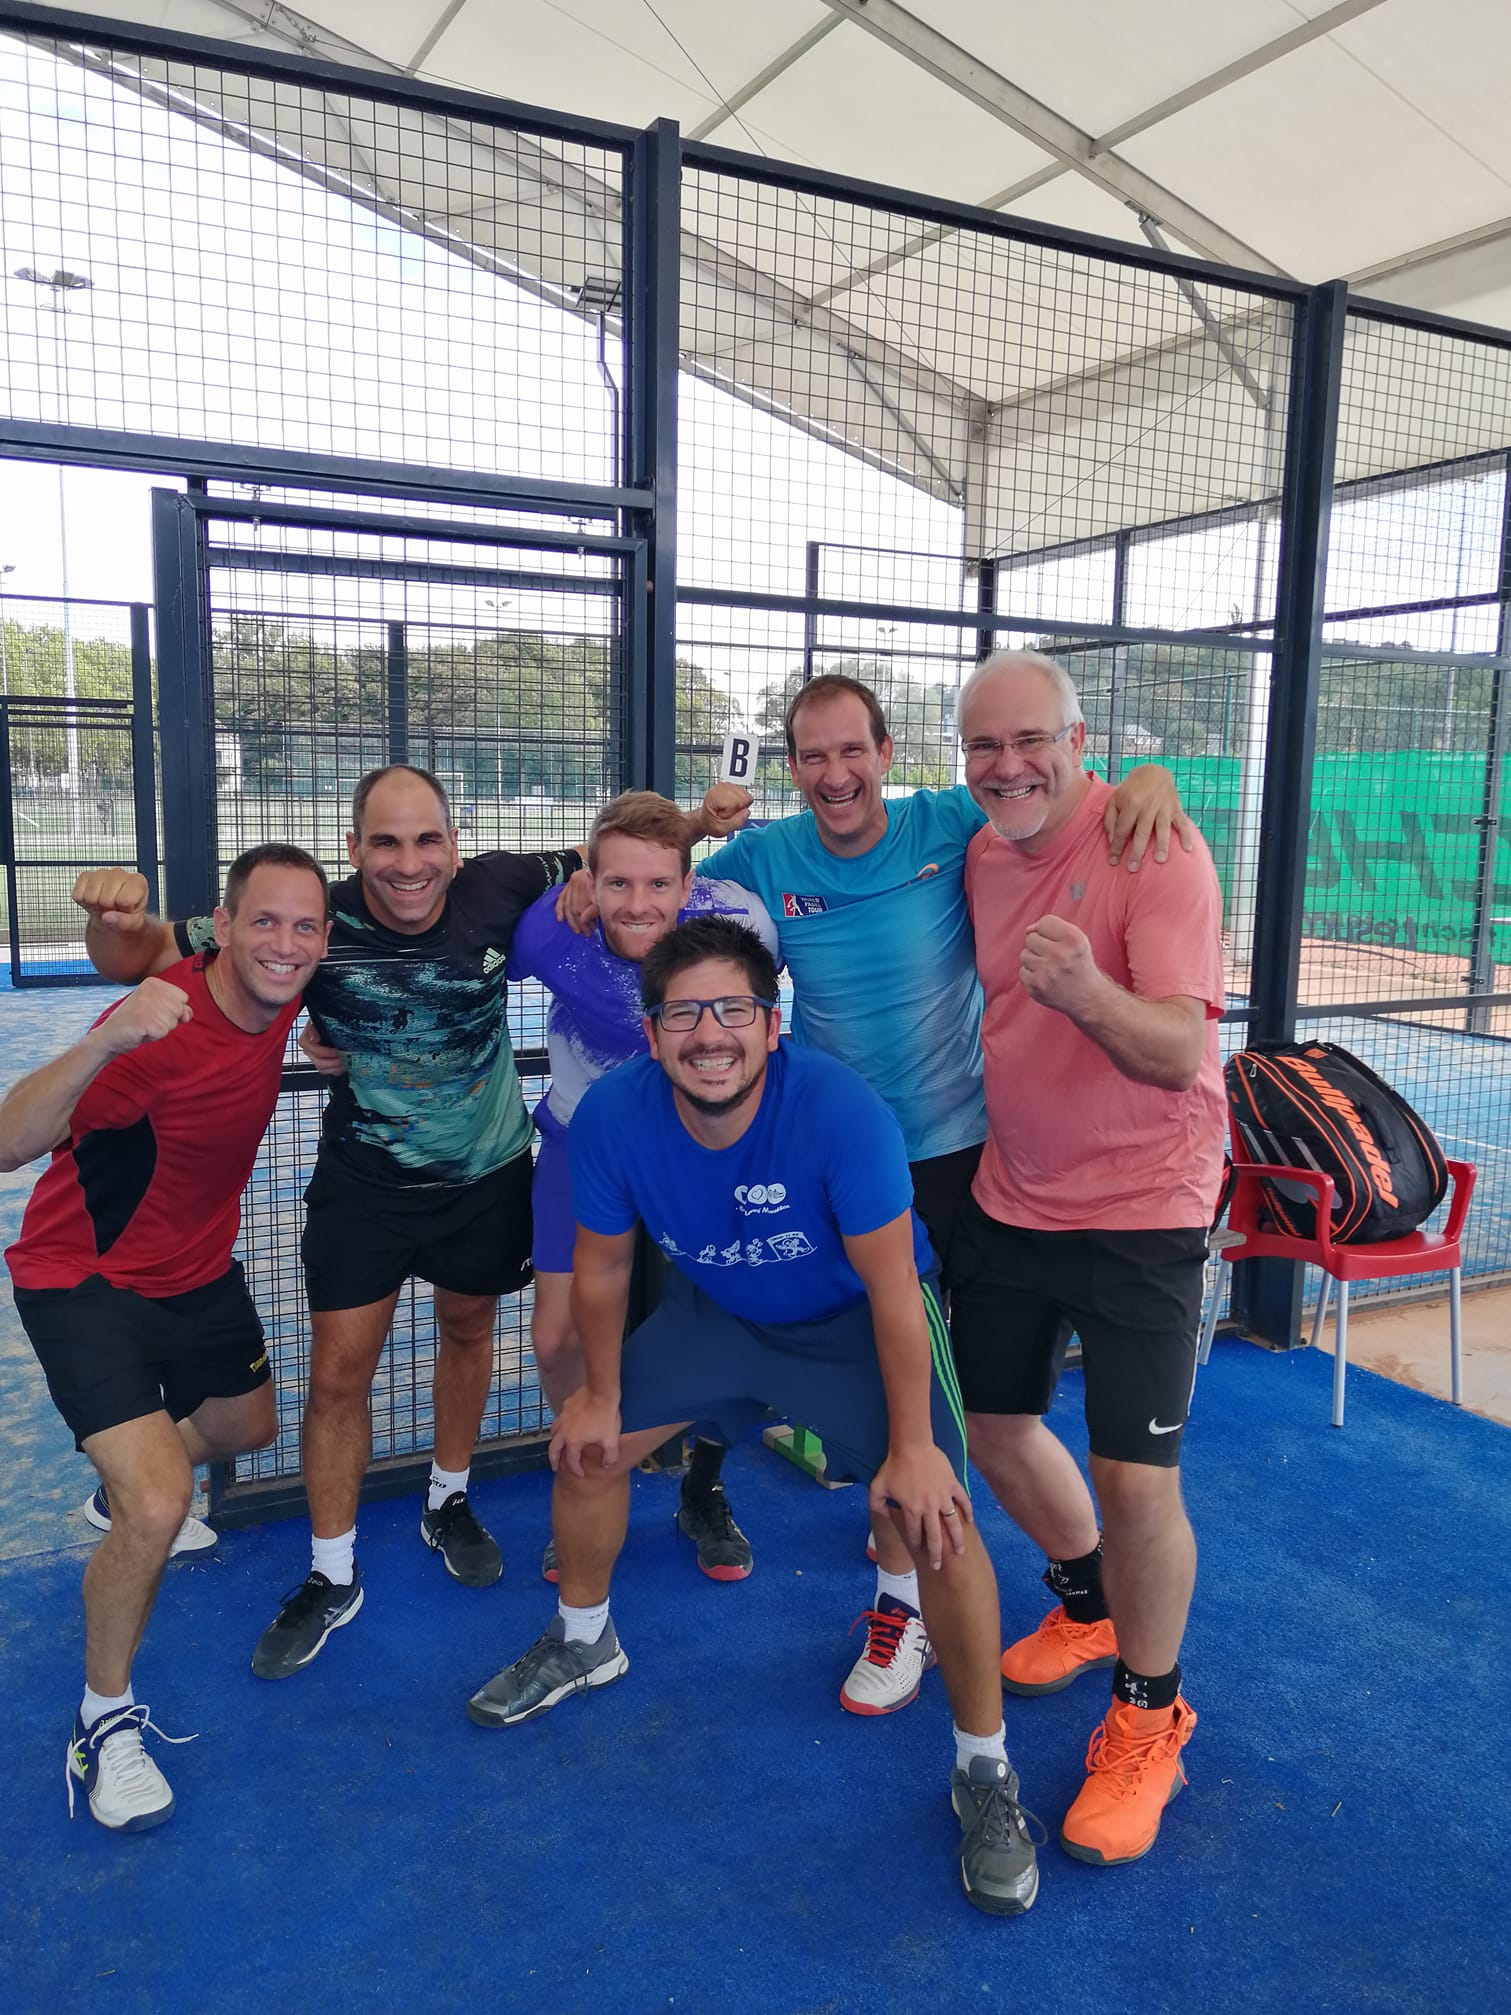 You are currently viewing Padel MD 250 – Quart de finale 2019